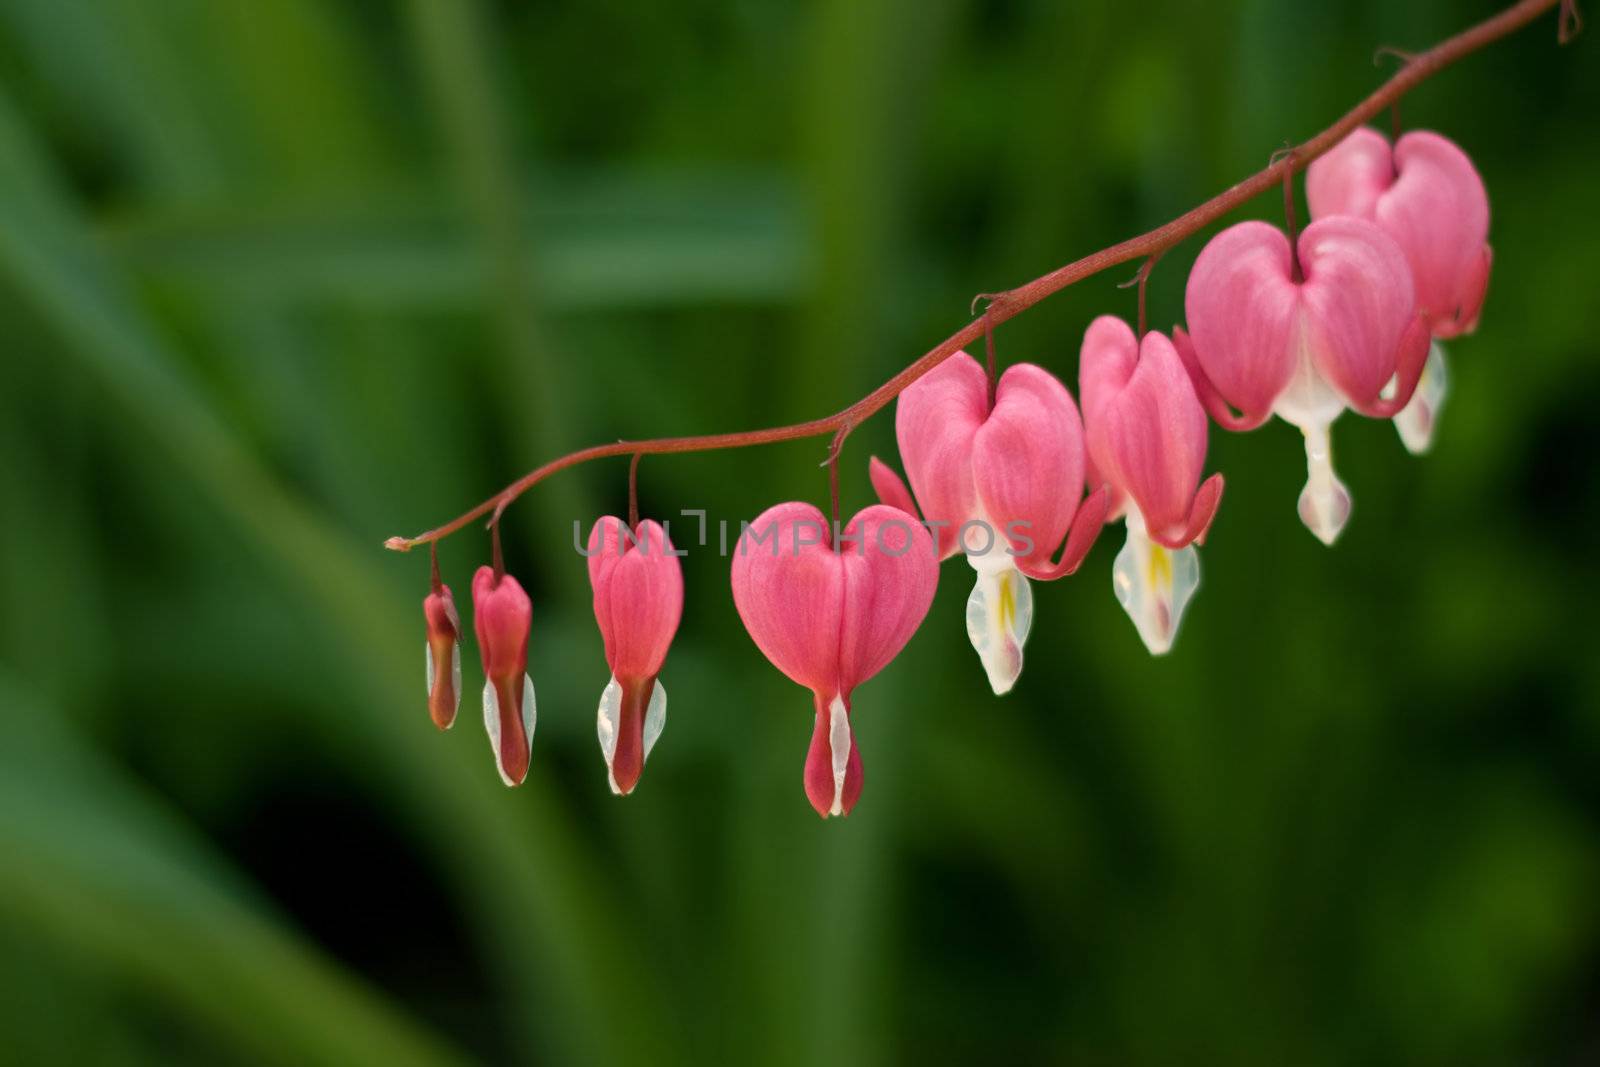 Heart-shaped dicentra flowers suspended on a stem